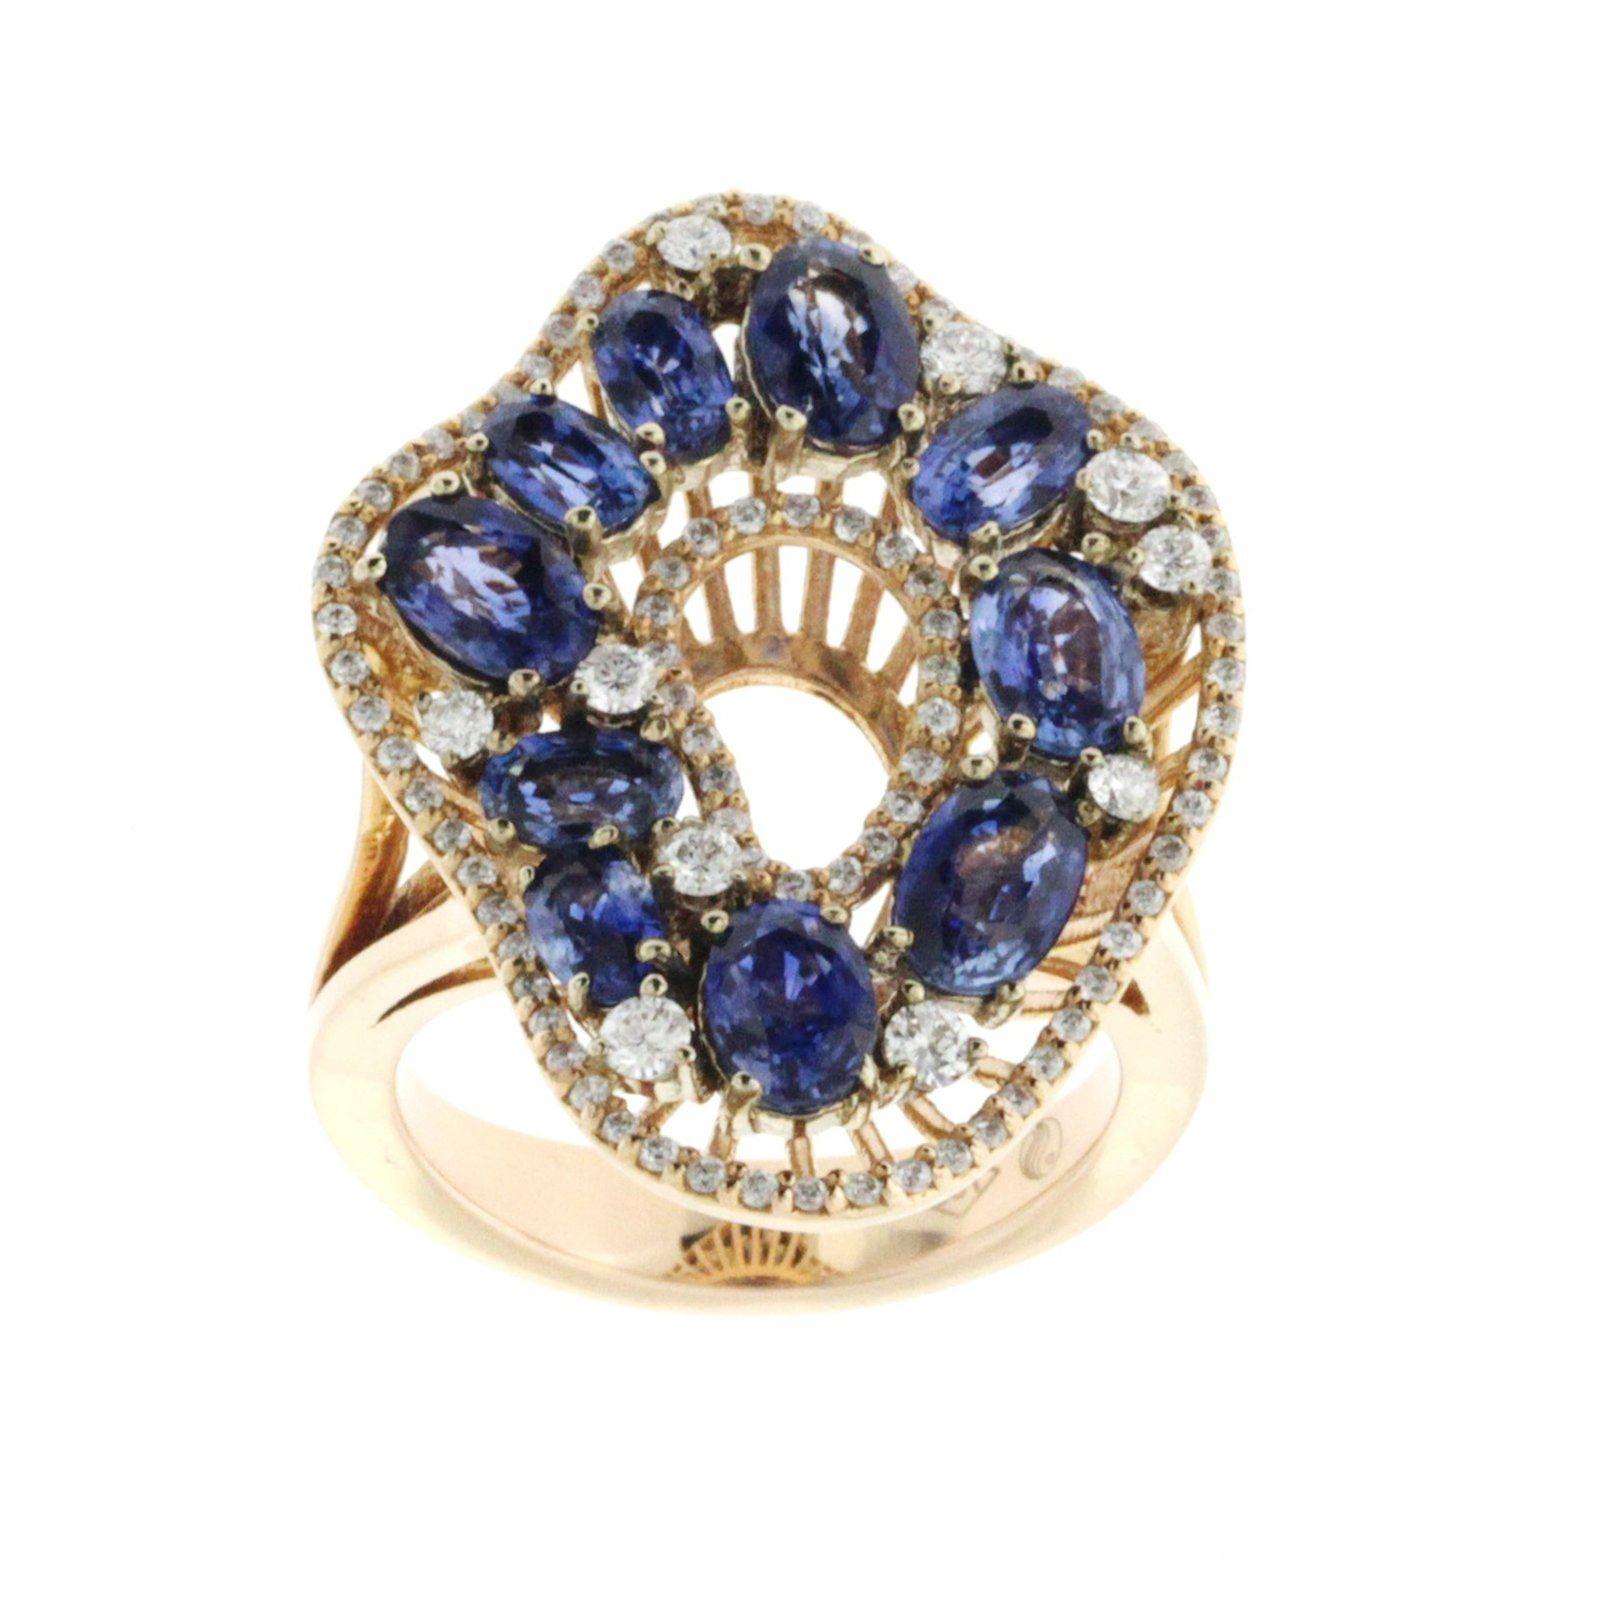 Top: 28.5 mm
Band Width: 4 mm
Metal: 18K Rose Gold 
Size: 6-8 ( Please message Us for your Size )
Hallmarks: 750
Total Weight: 11.4 Grams
Stone Type: 3.10 CT Natural African Sapphires & 0.61 G SI1 CT Diamonds
Condition: New
Estimated Retail Price: